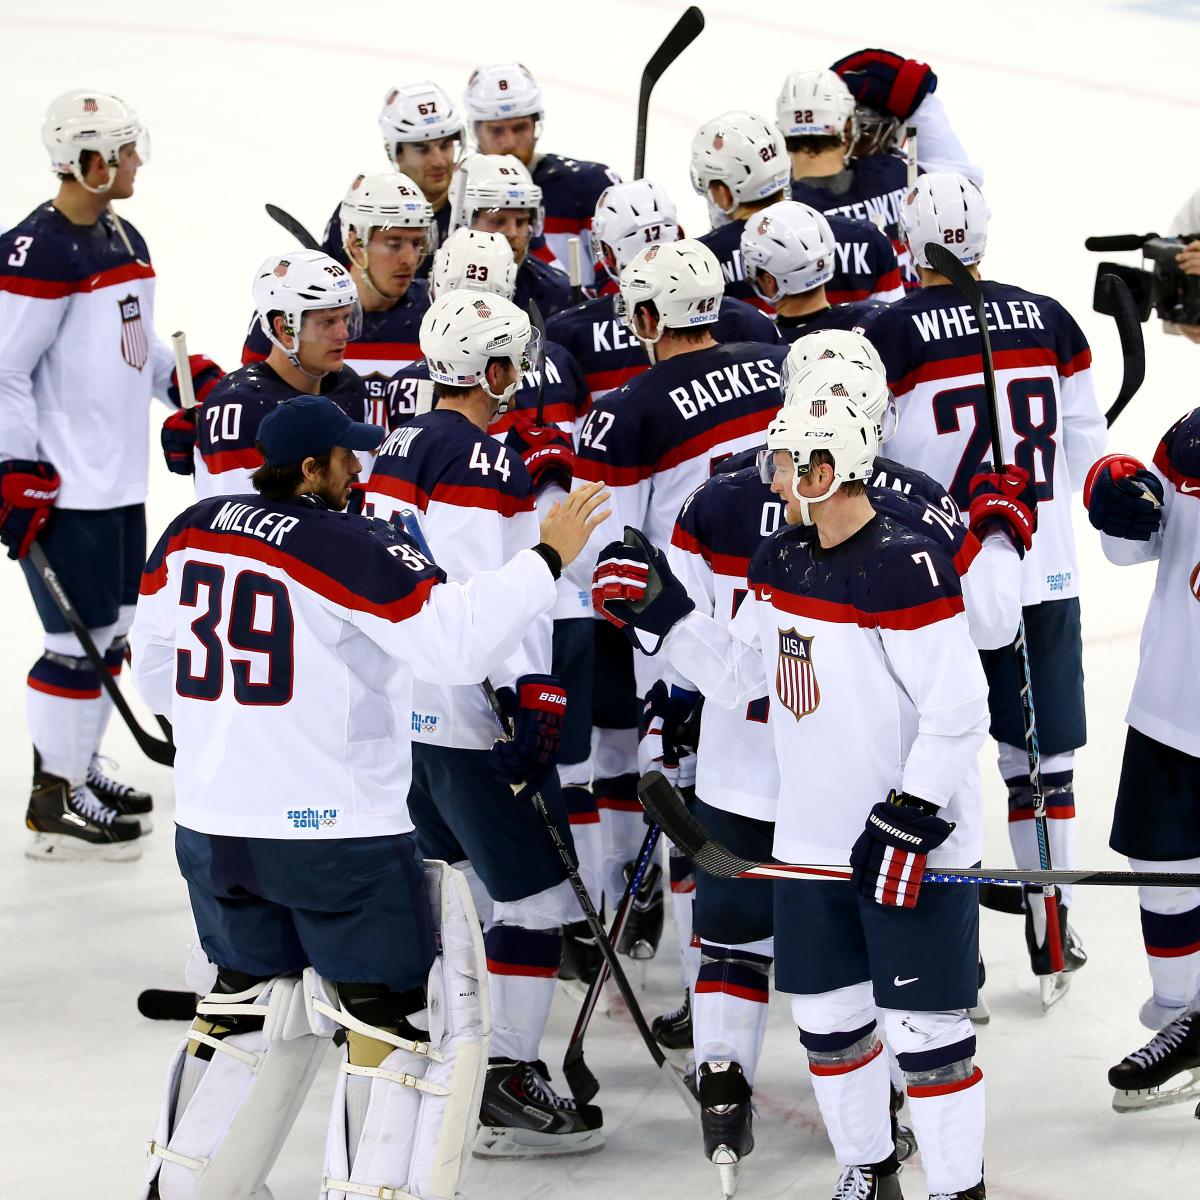 USA vs. Russia: Key Storylines in 2014 Winter Olympics Group Stage